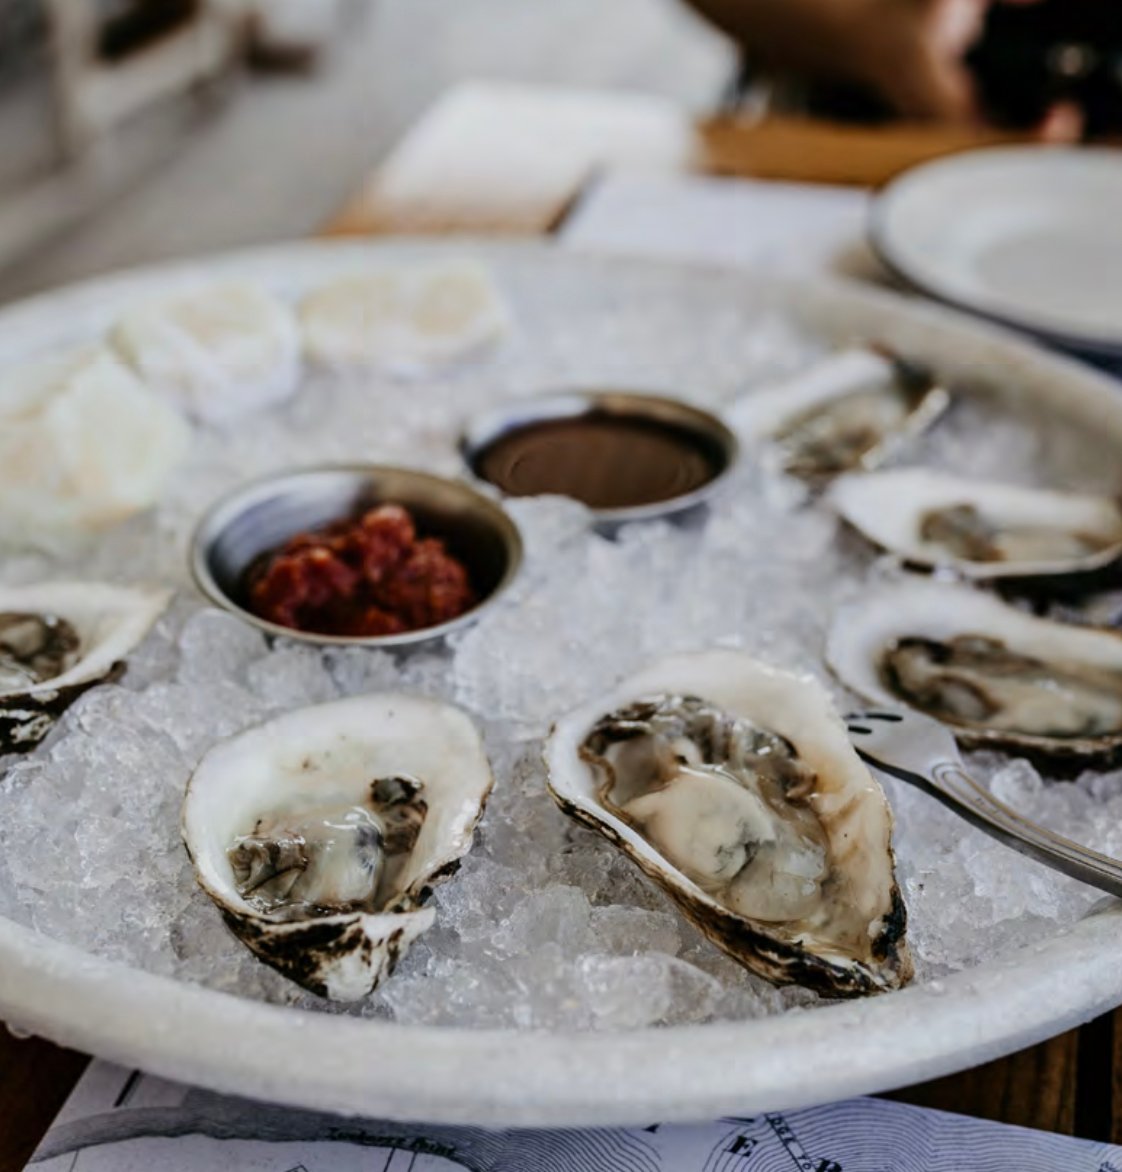 Oysters on ice on plate